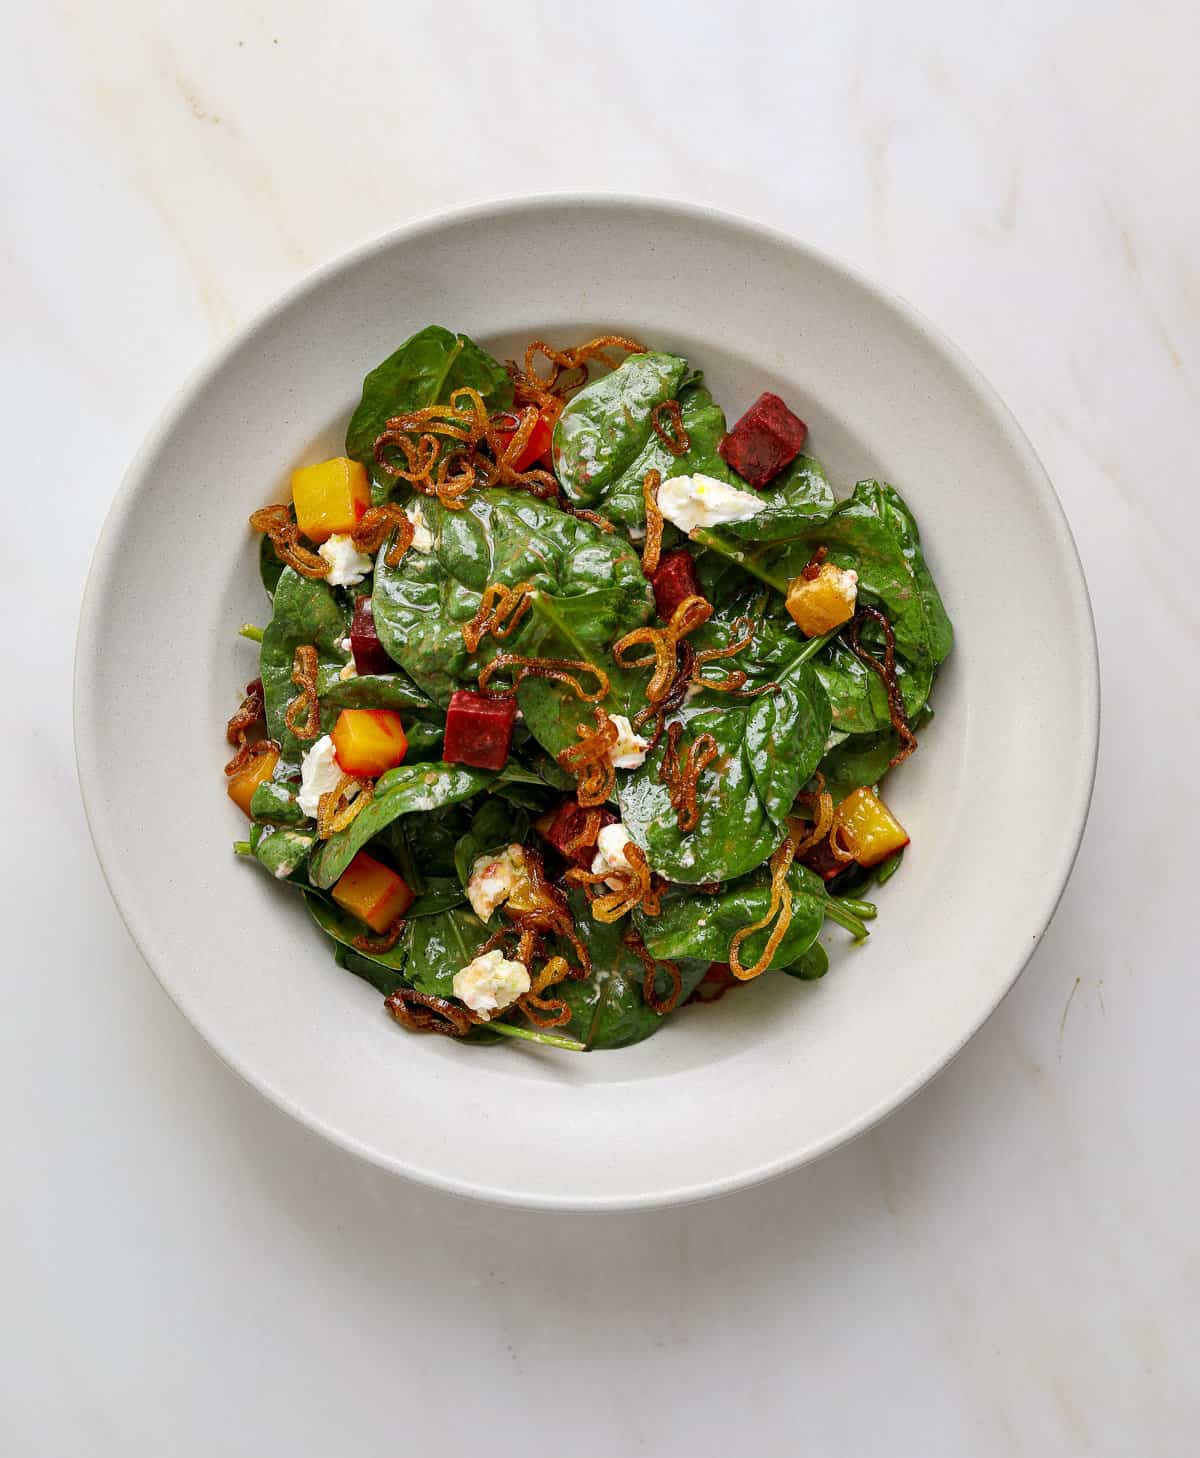 Warm Spinach Salad with Roasted Beets, Goat Cheese and Crispy Shallots